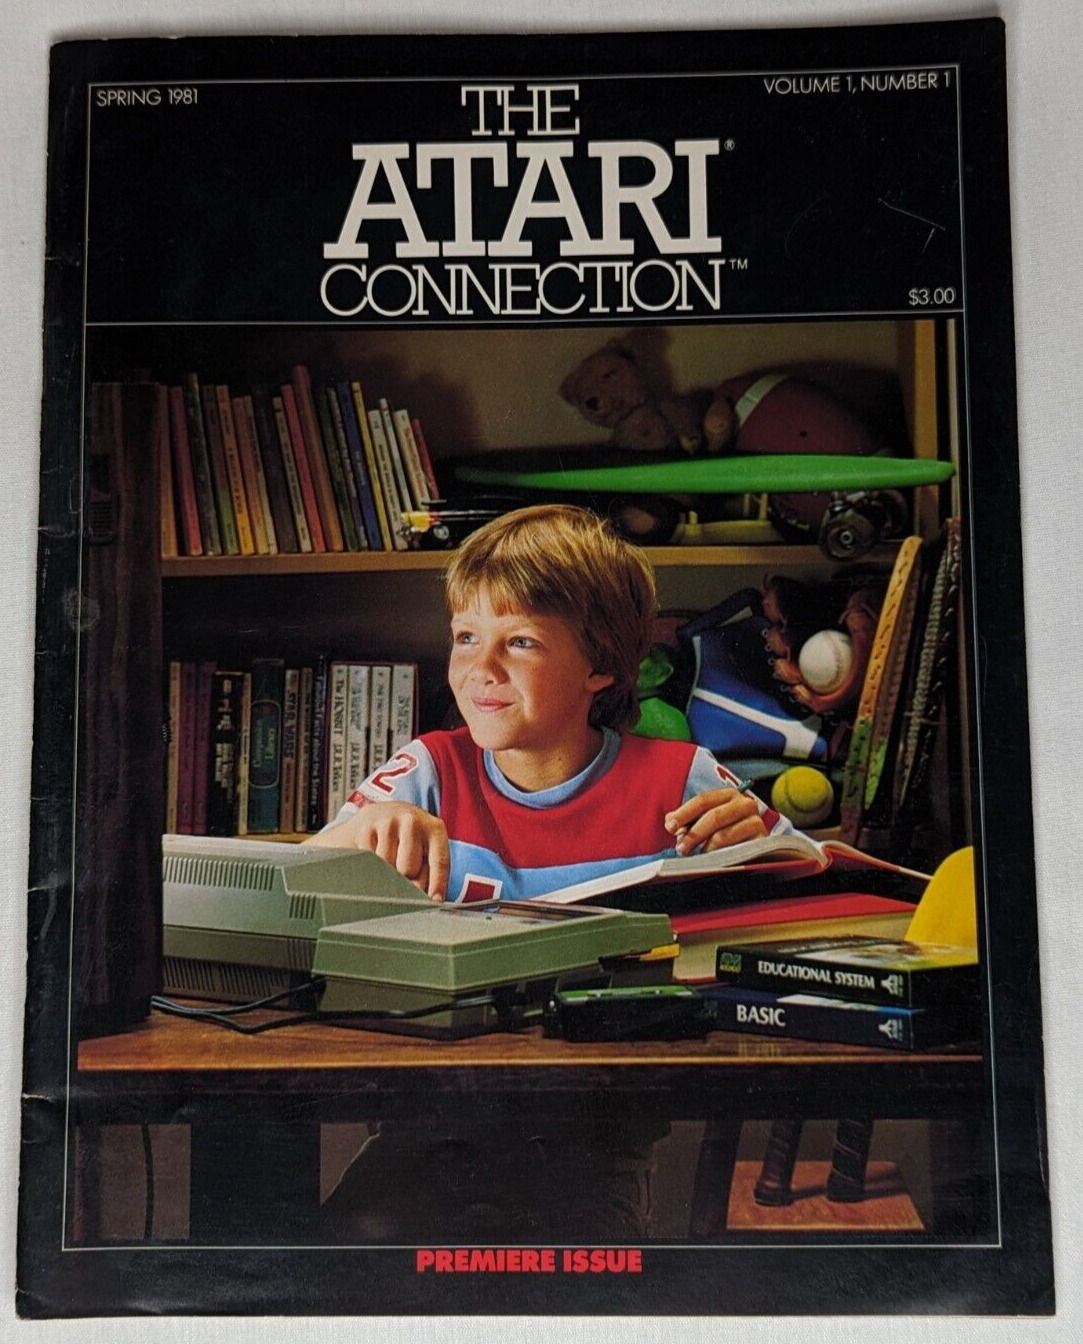 The Atari Connection Volume 1 Number 1 Spring 1981 Premiere Issue Magazine